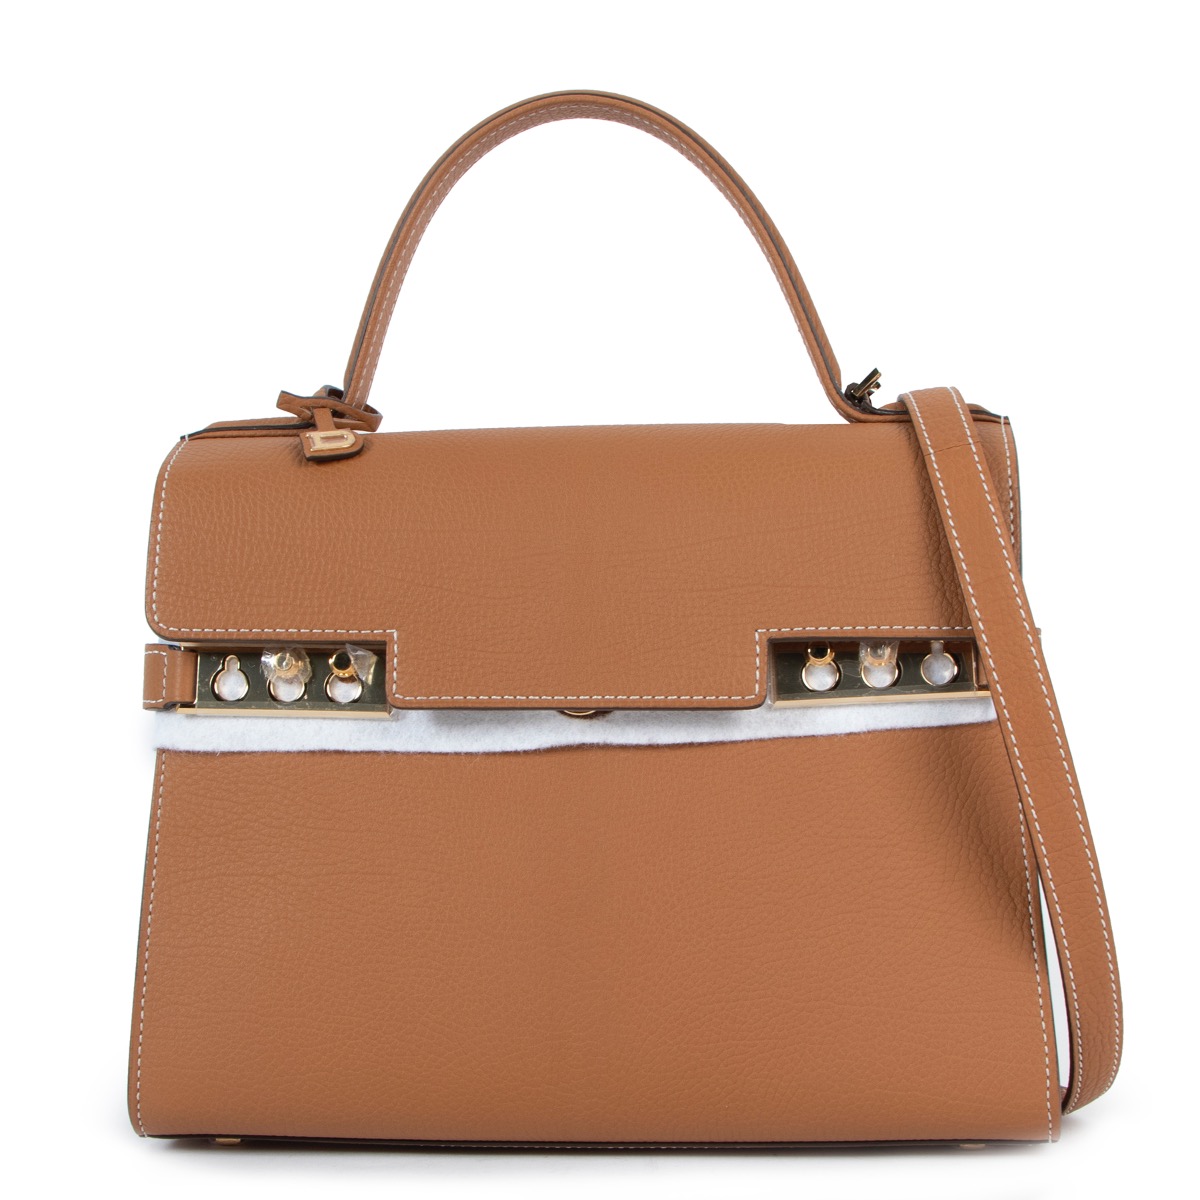 Delvaux Tempete Top Handle Bag Leather MM, crafted from brown leather